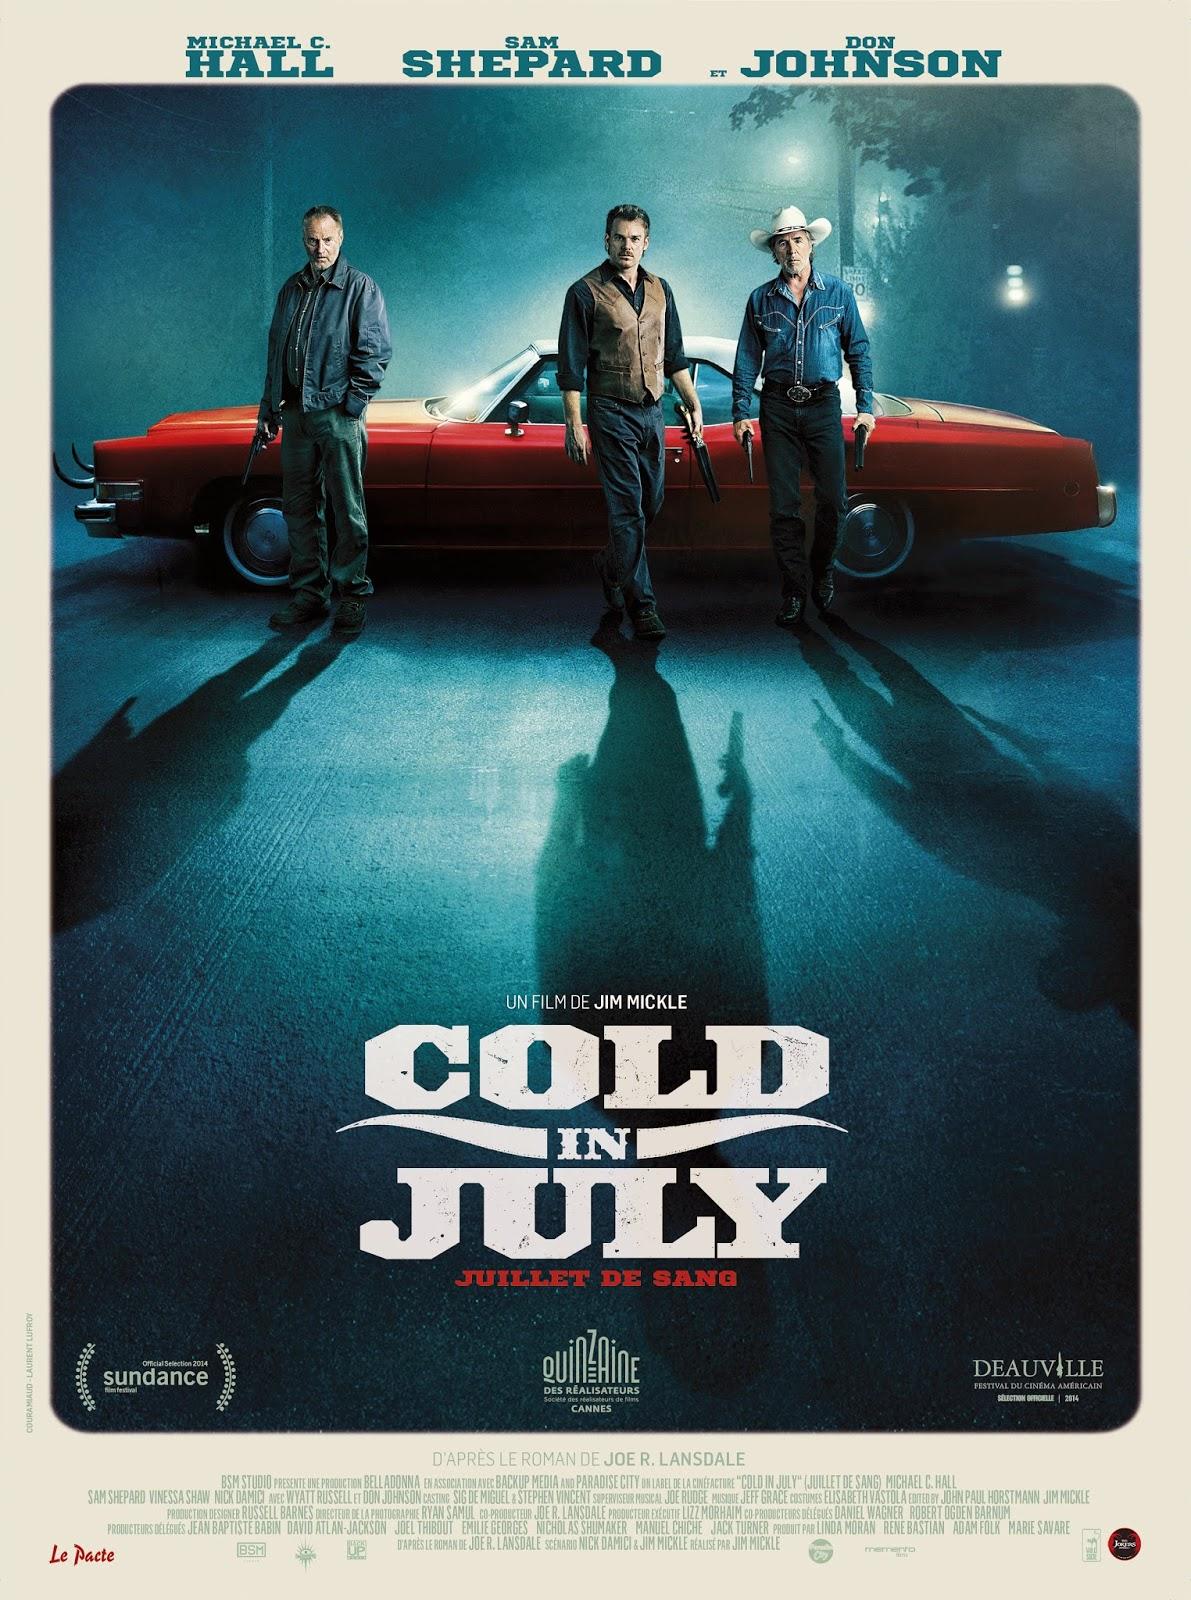 CINEMA: [INVITATIONS] Cold in July (2014), back to the eighties